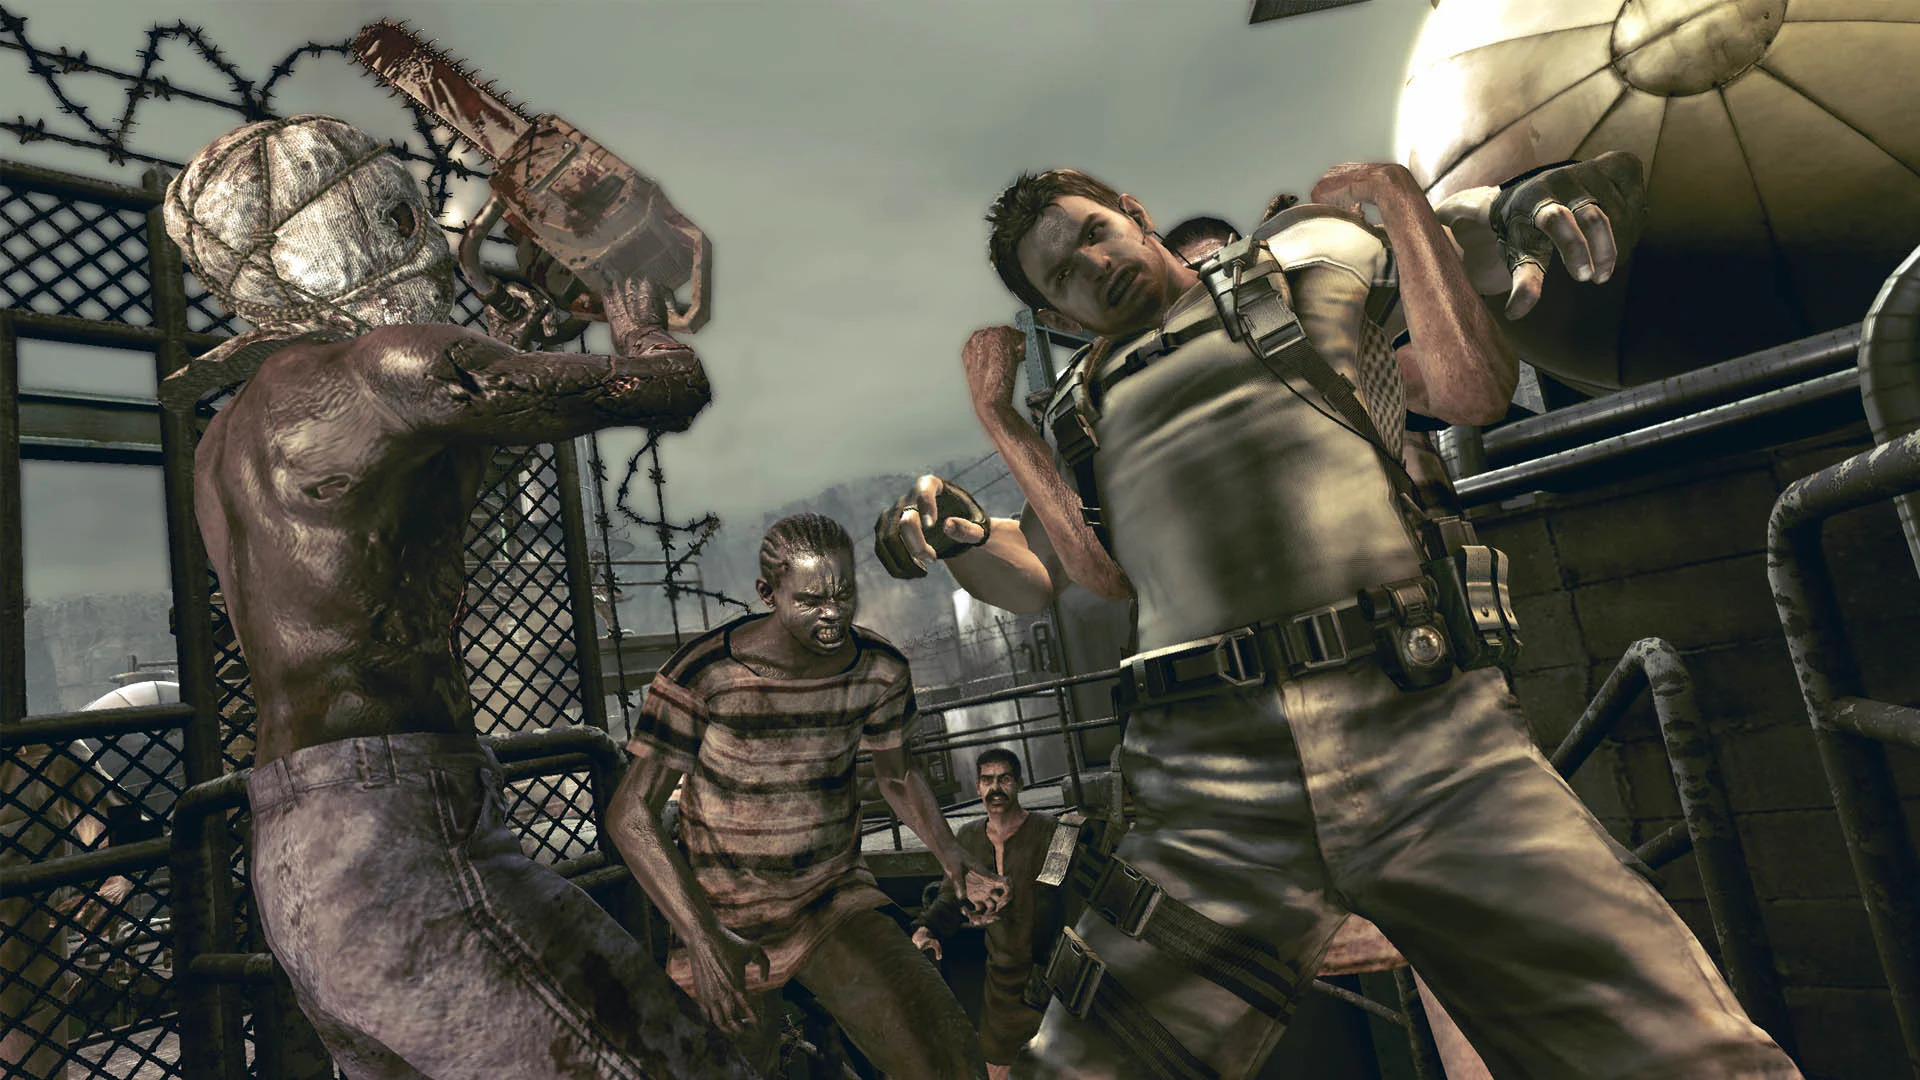 How To Download RESIDENT EVIL 5 On Android 